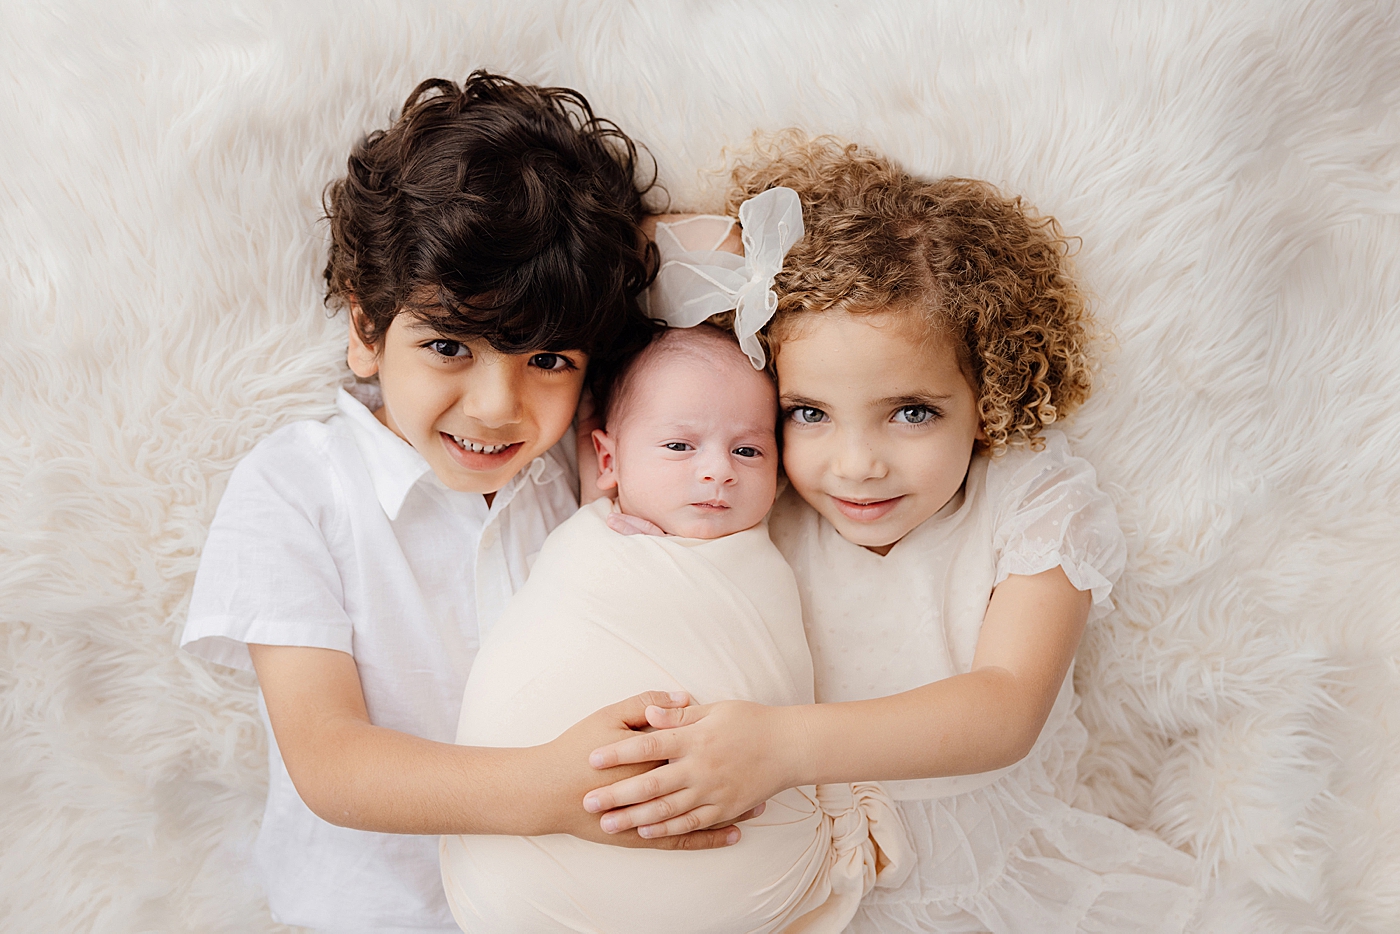 Big brother and sister with their new baby | Image by Halleigh Hill